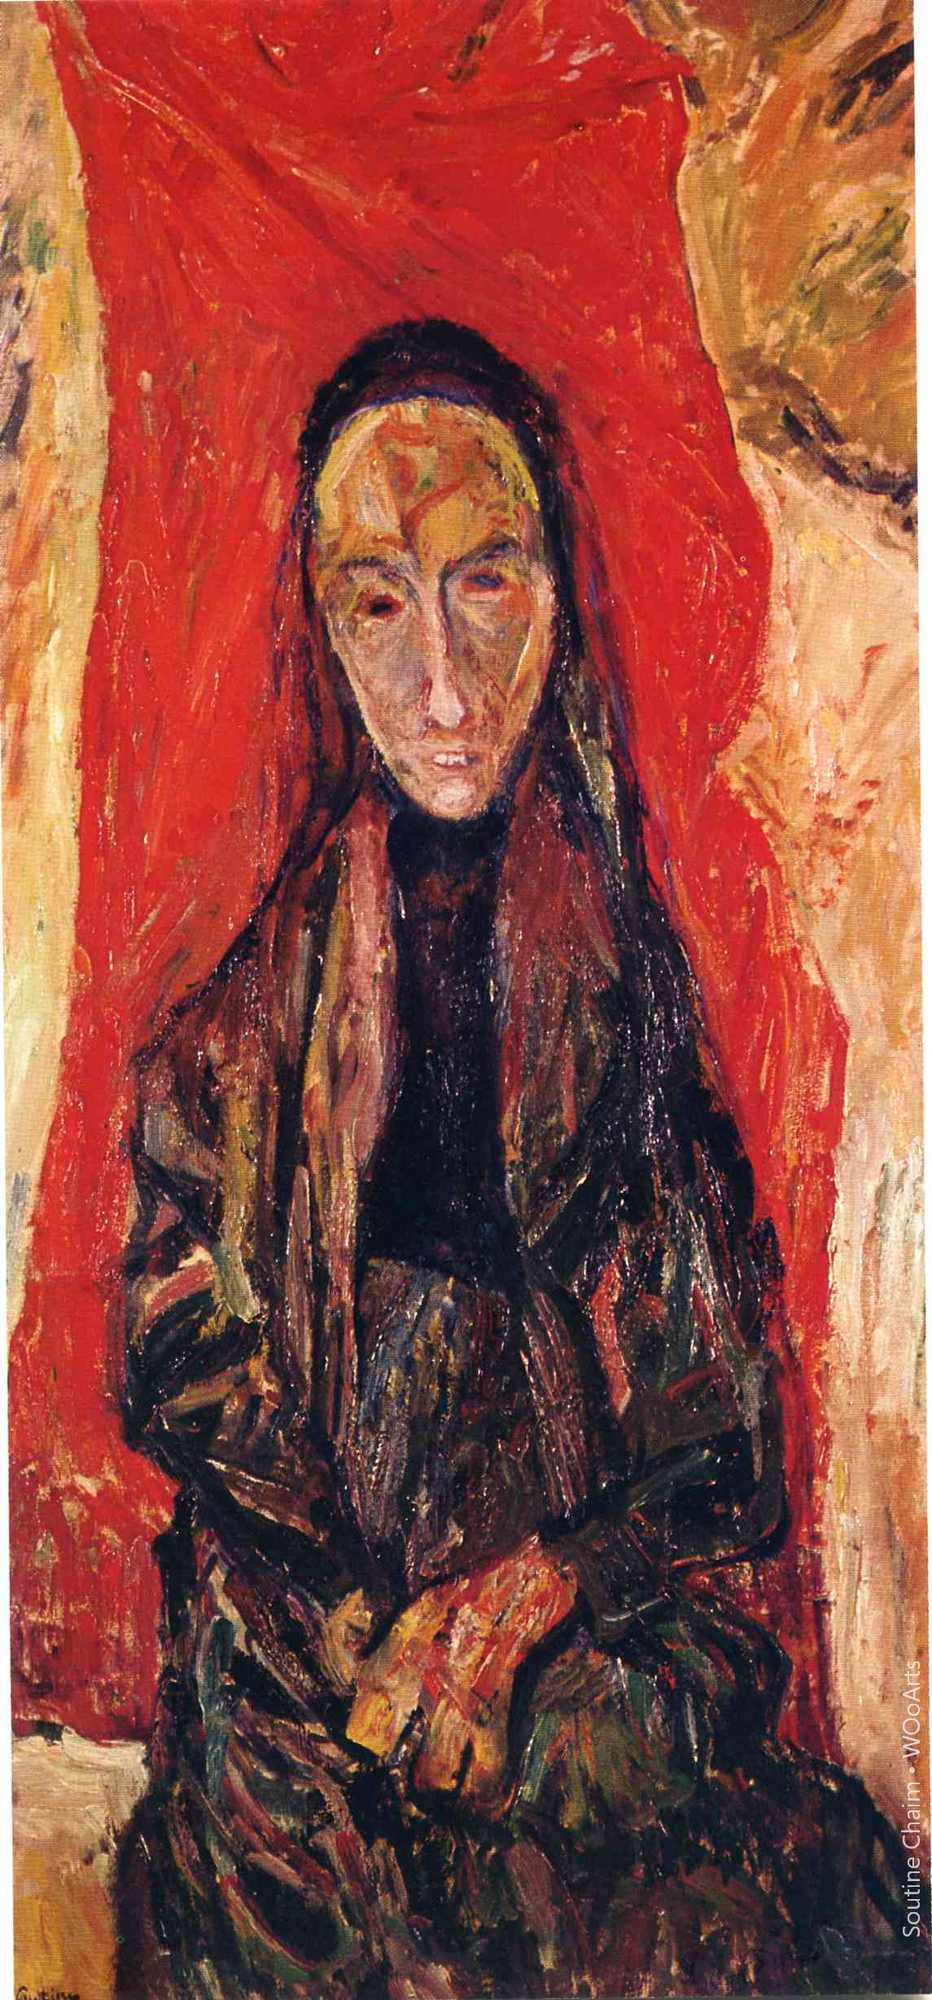 Painting by Soutine Chaim